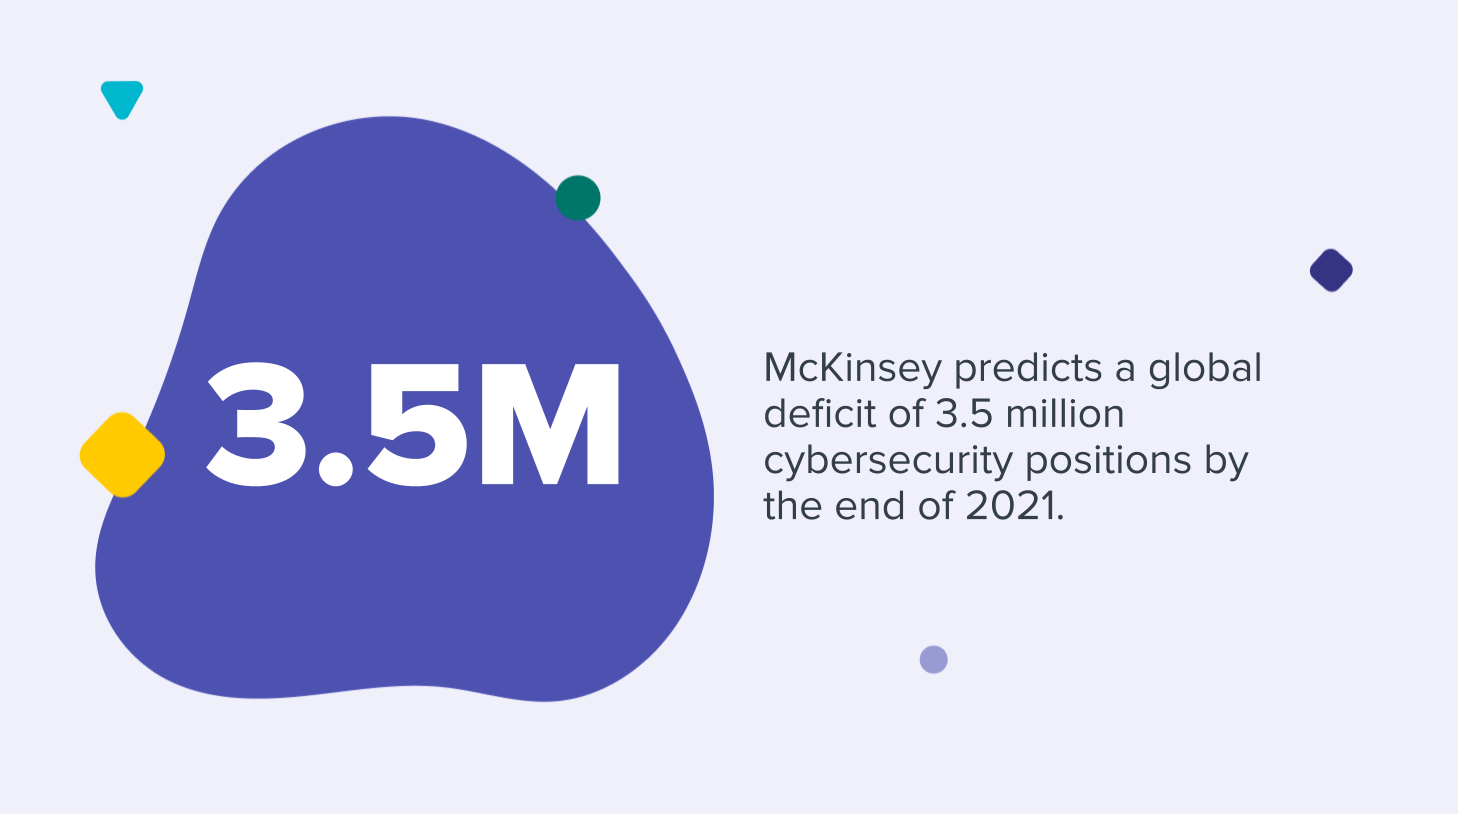 McKinsey’s experts are predicting a global deficit of 3.5 million cybersecurity positions by the end of this year